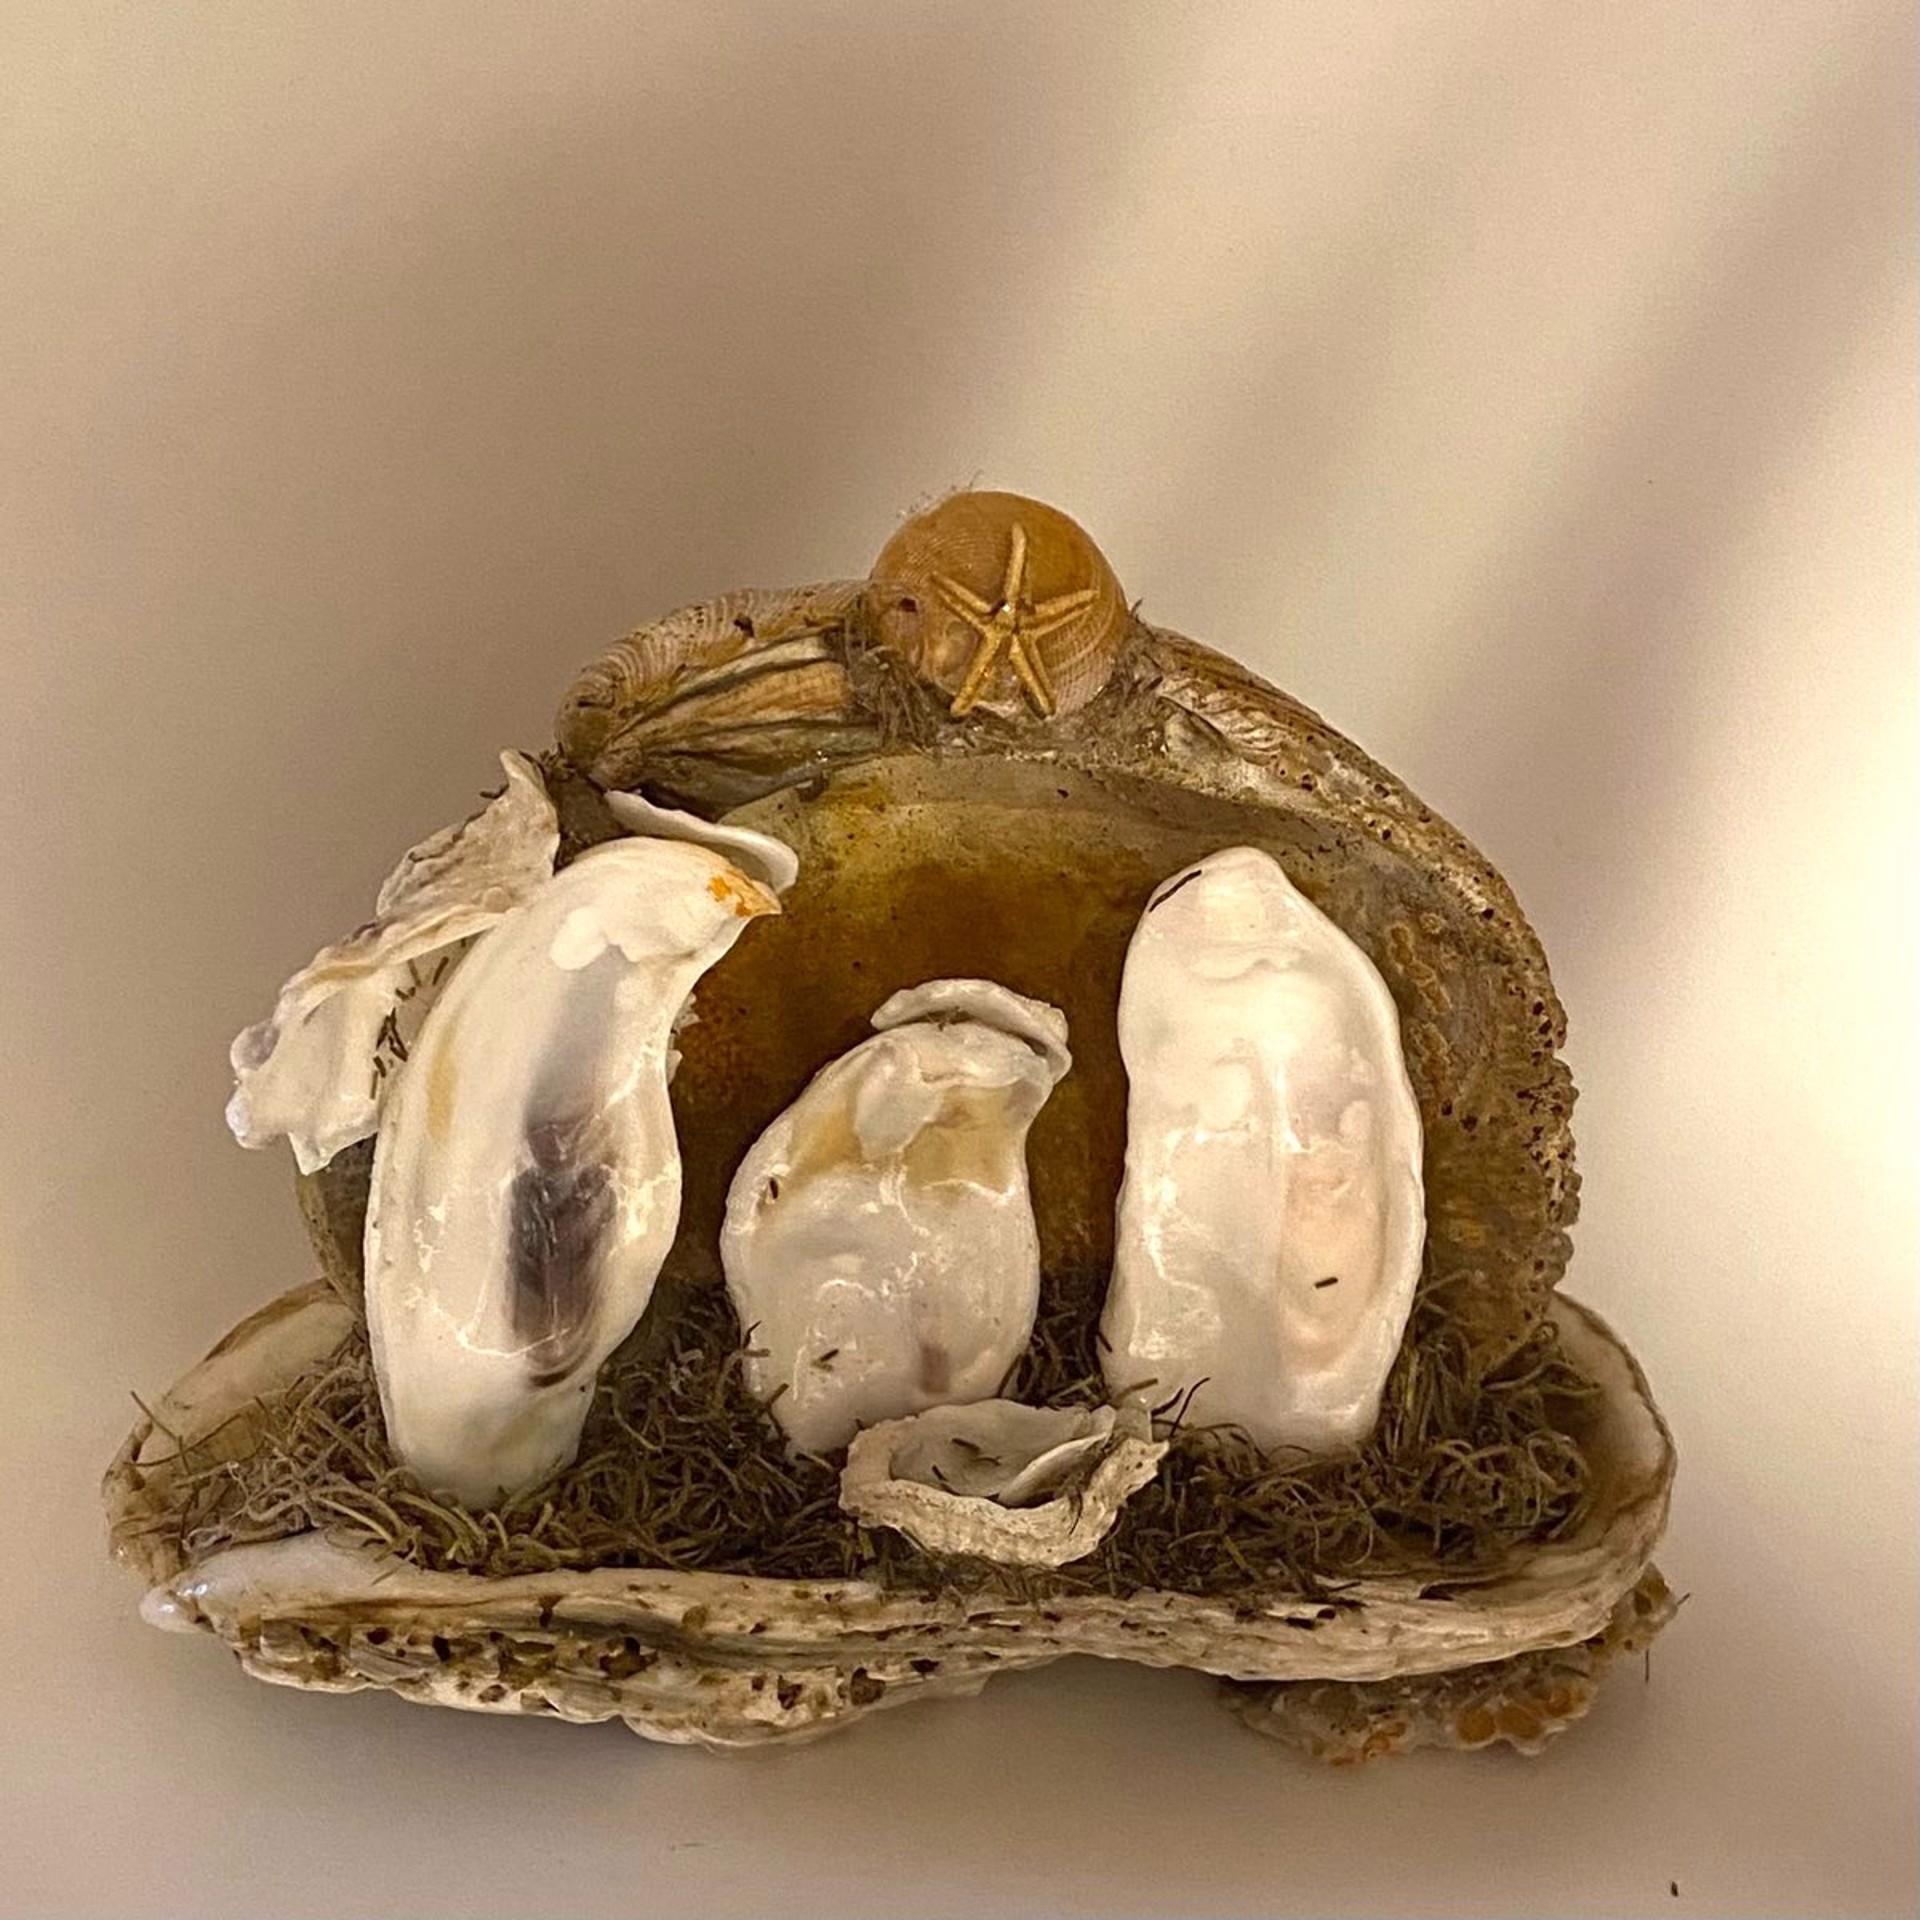 CN22-48 Crèche from the Sea - Clam Shell on Large Oyster Shell by Chris Nietert